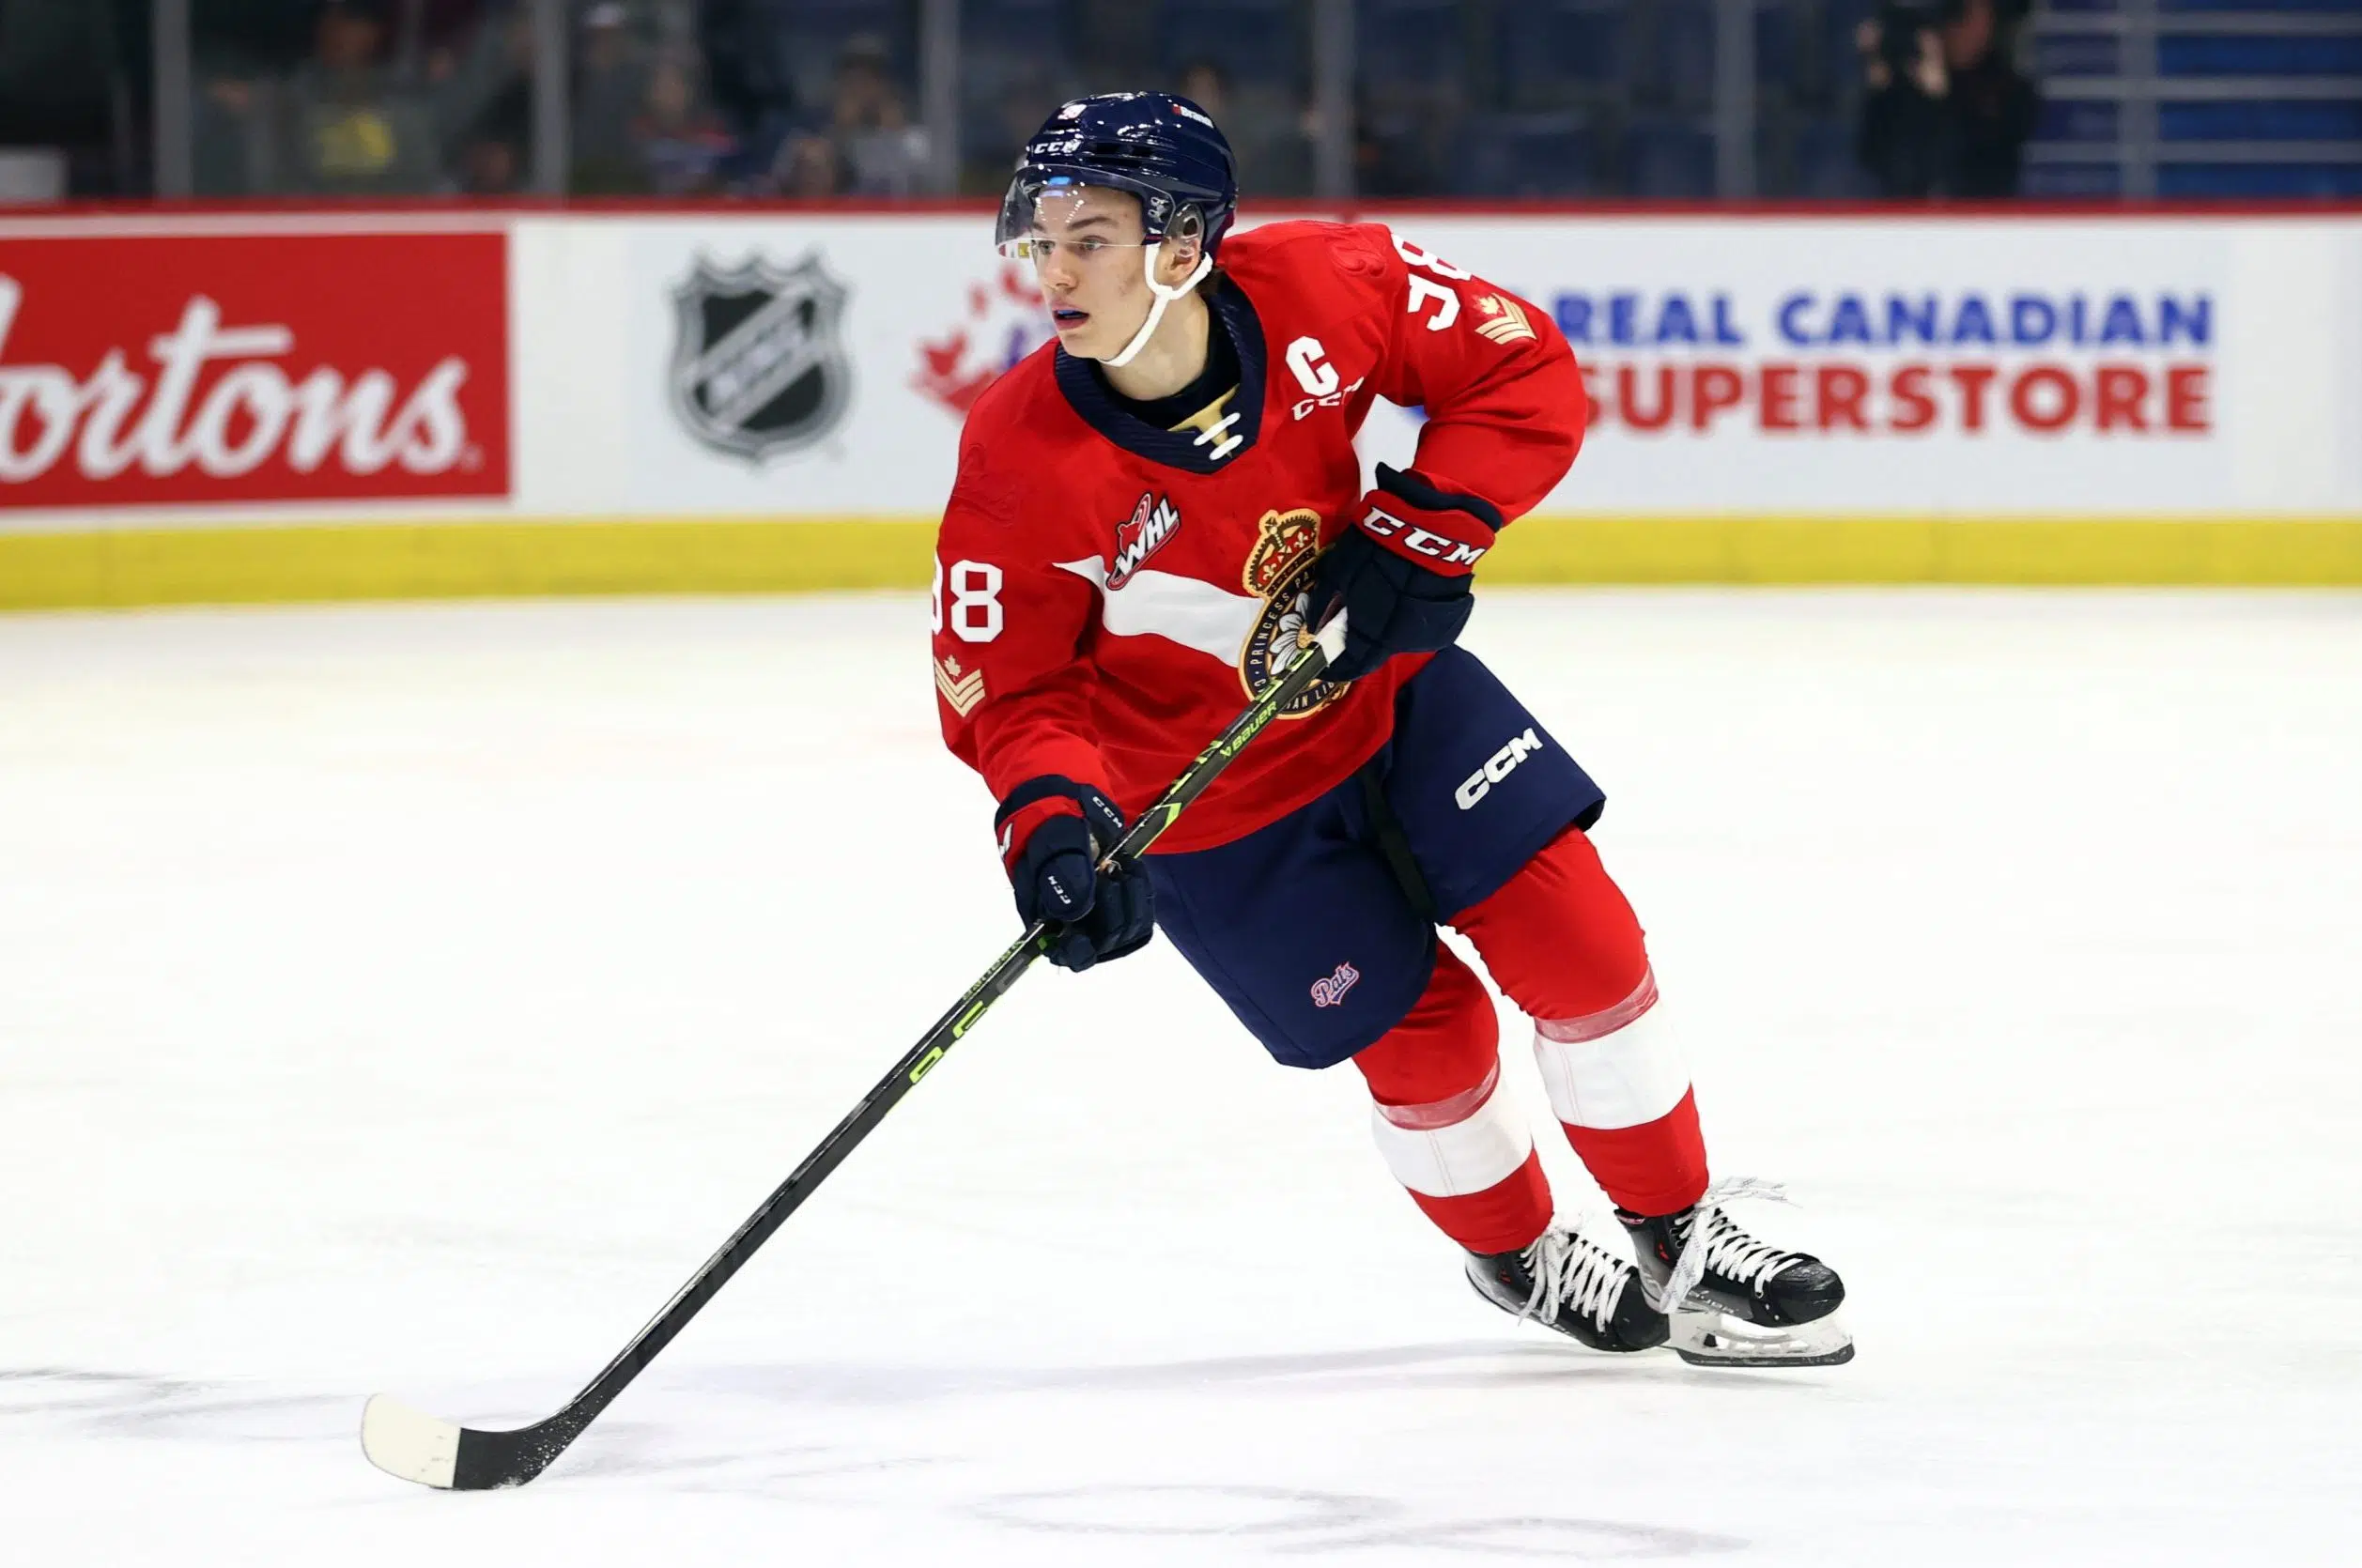 Pats’ Bedard earns A rating from NHL Central Scouting